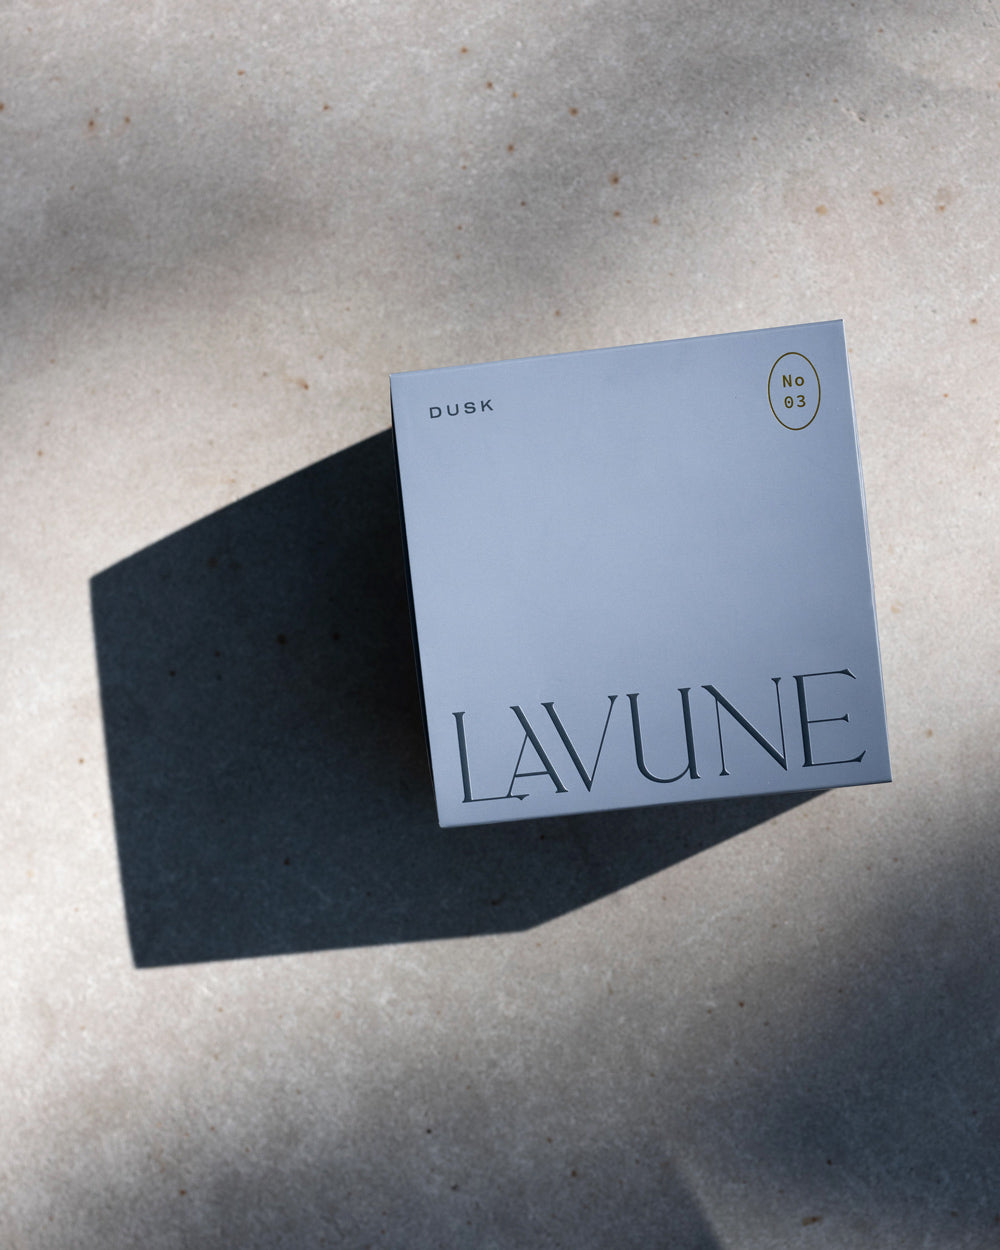 Lavune Dusk Candle